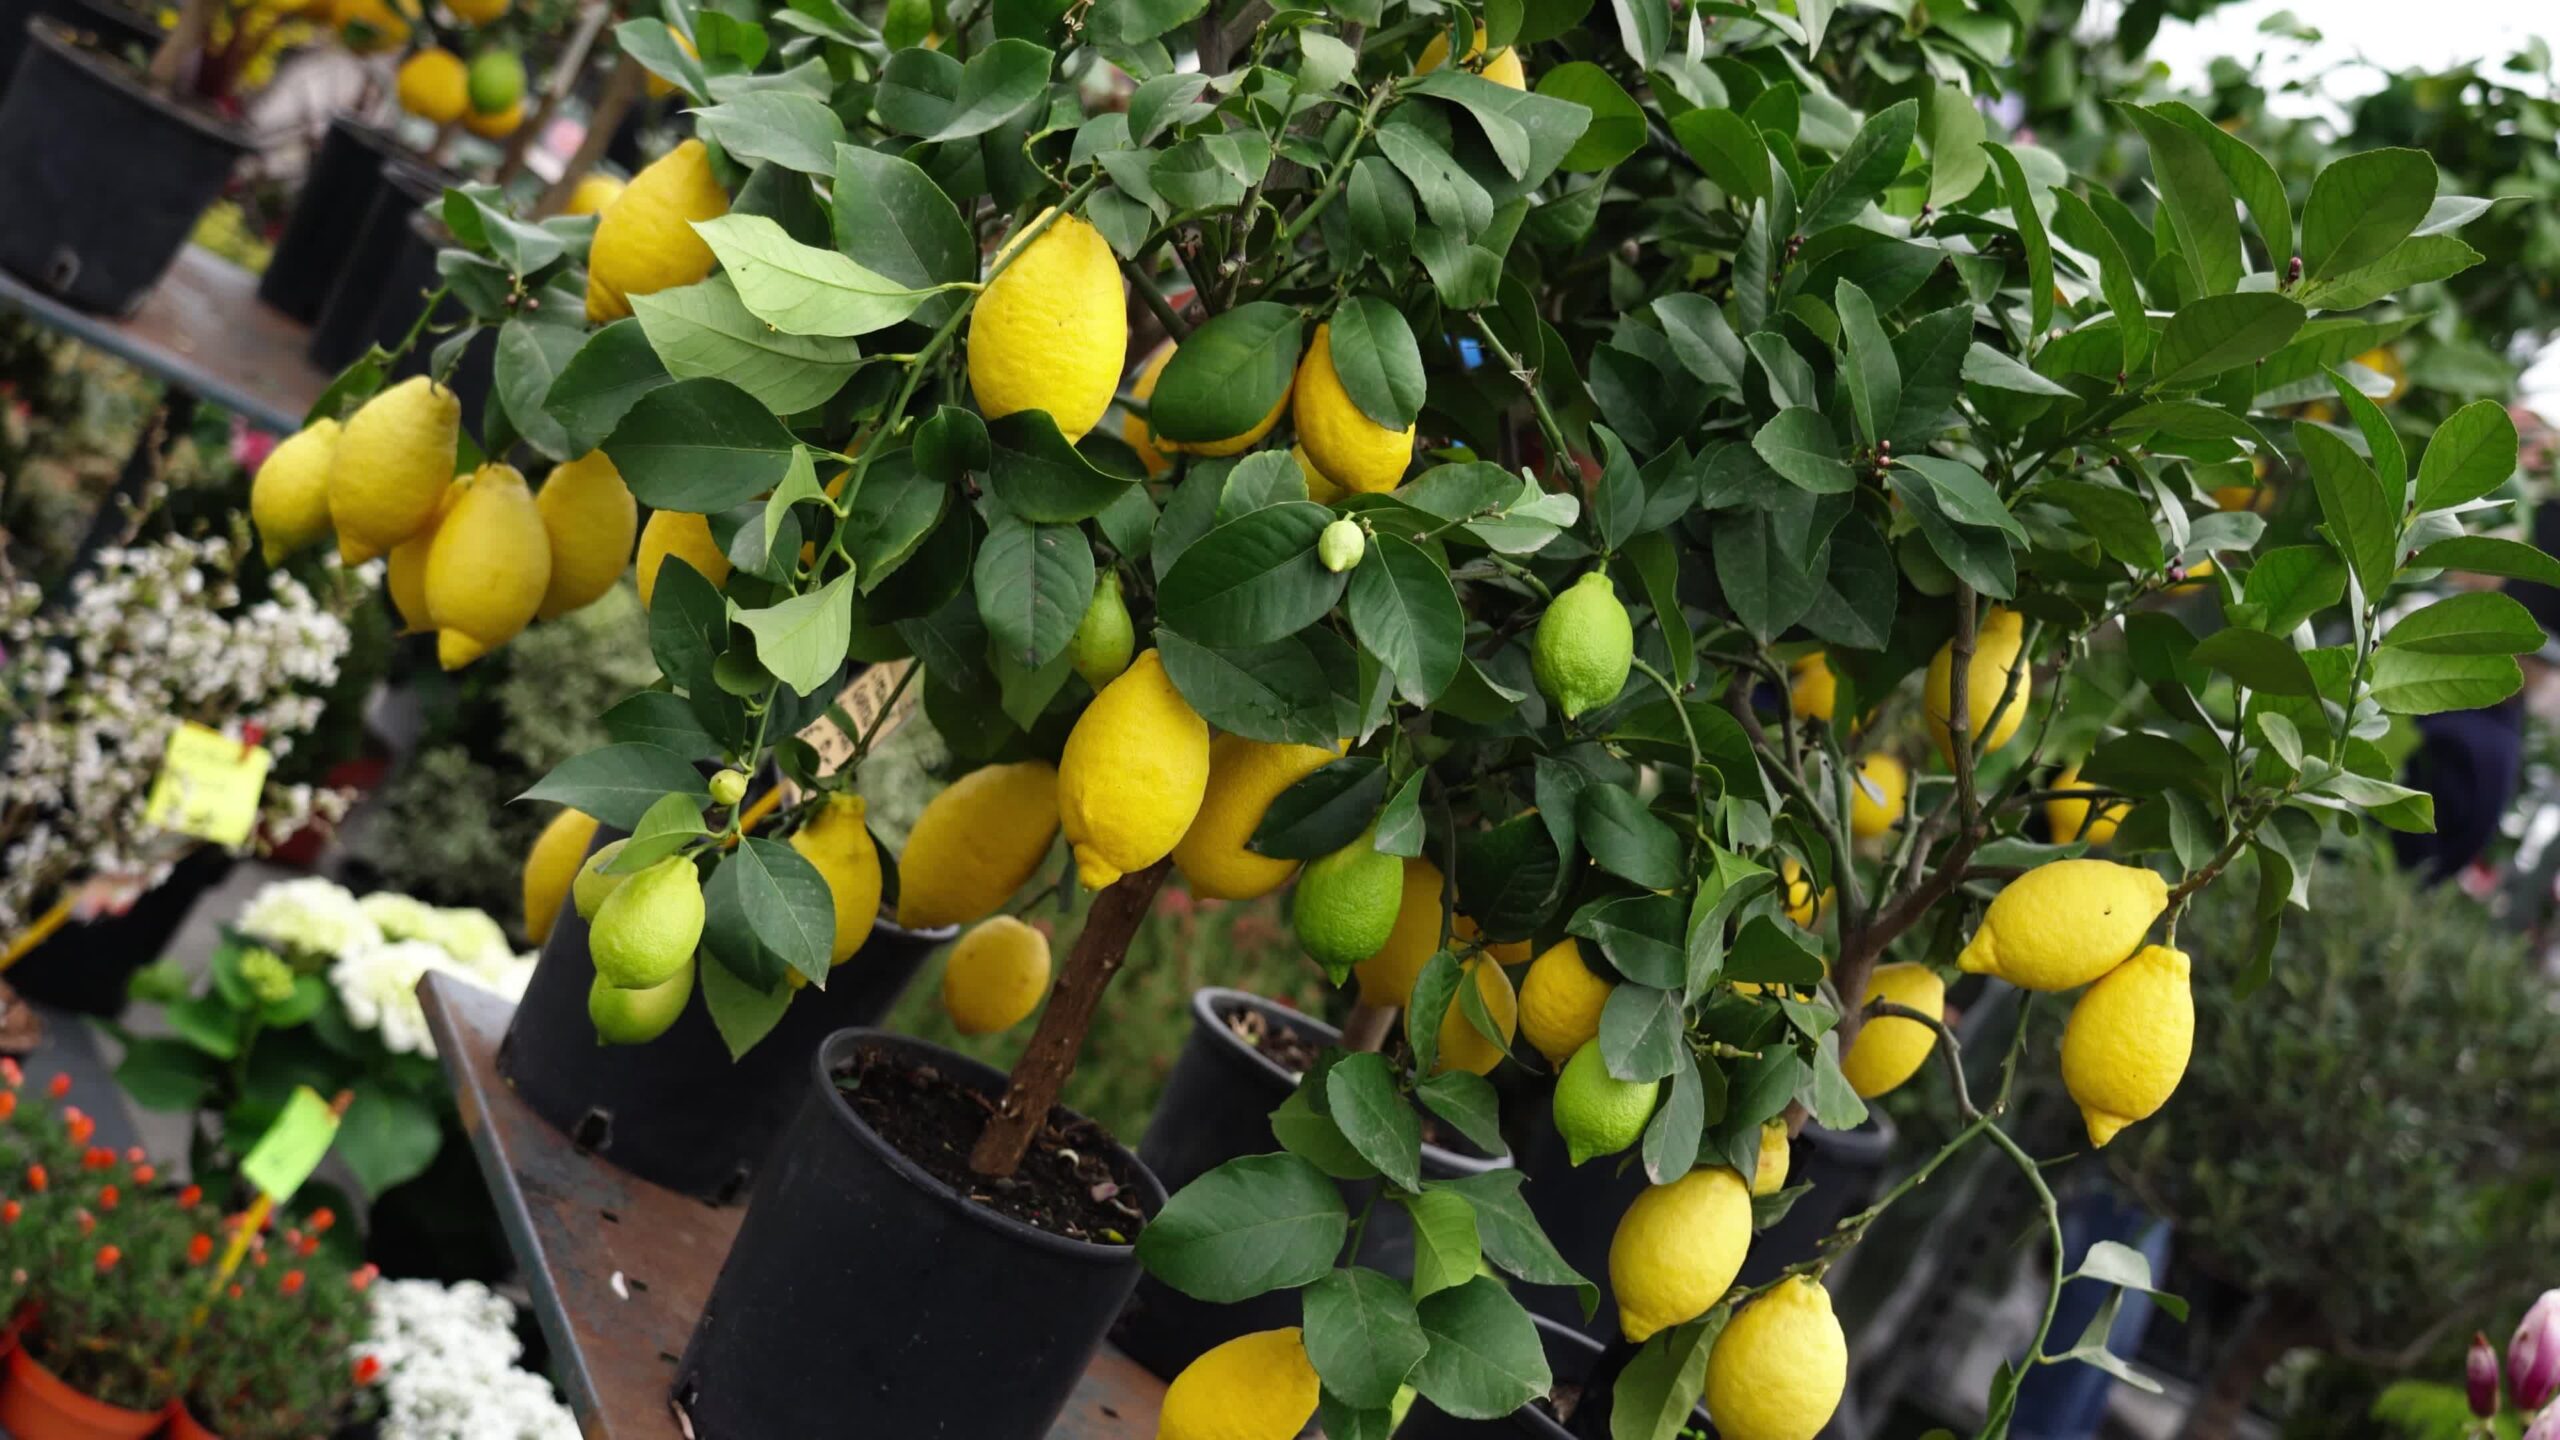 Lemon trees with green and yellow fruits in pot plants